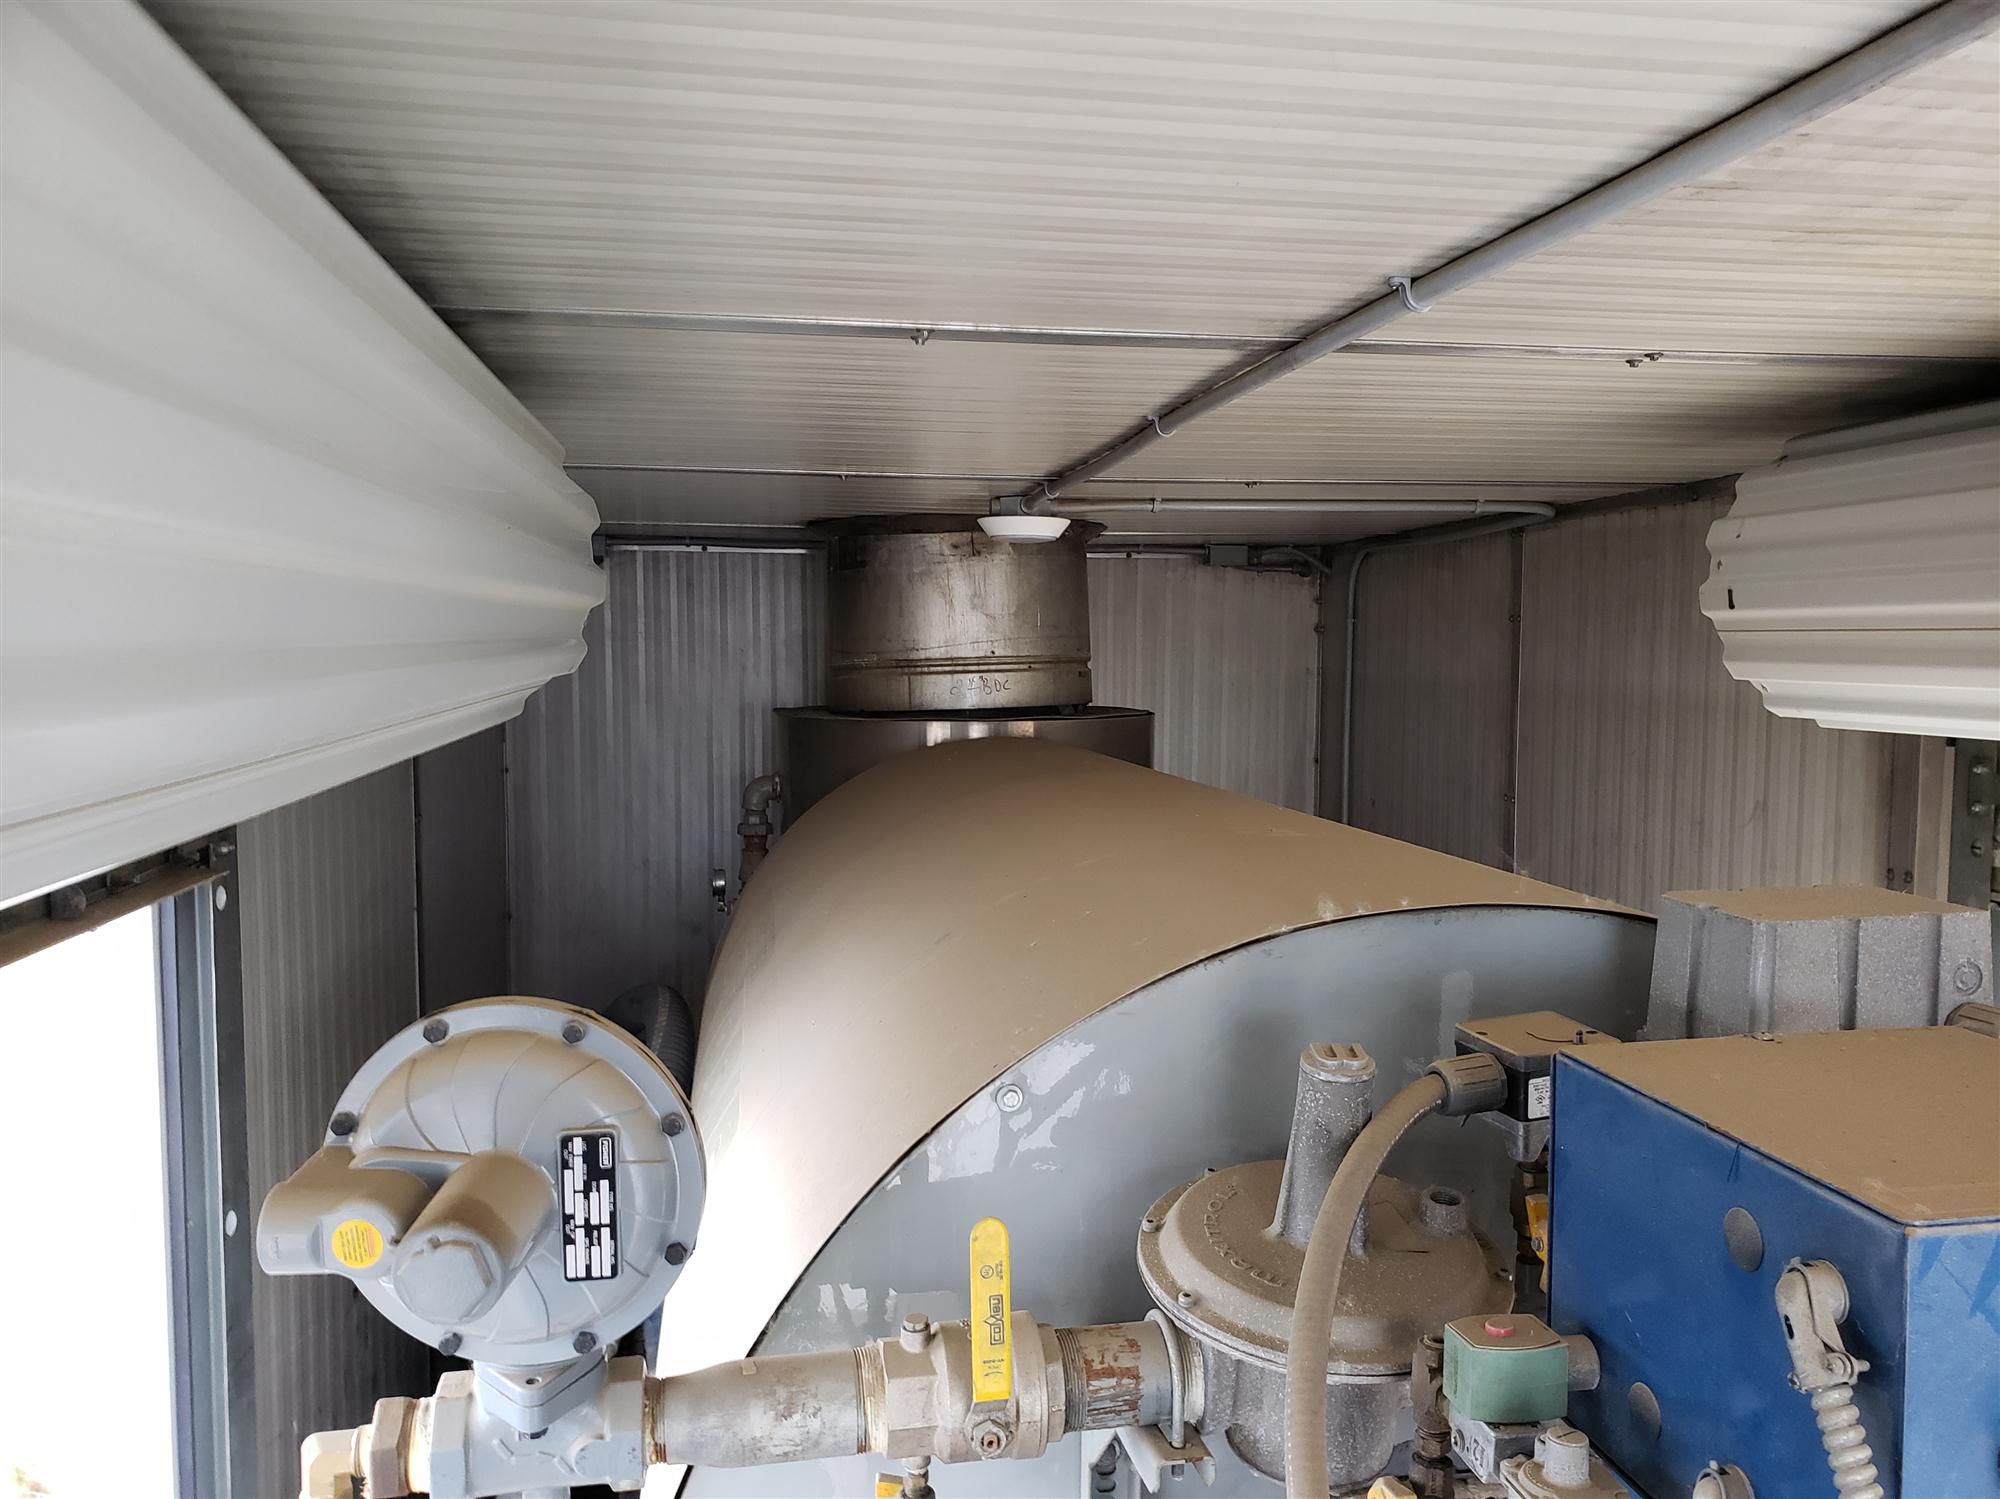 Industrial water heater in an enclosed trailer